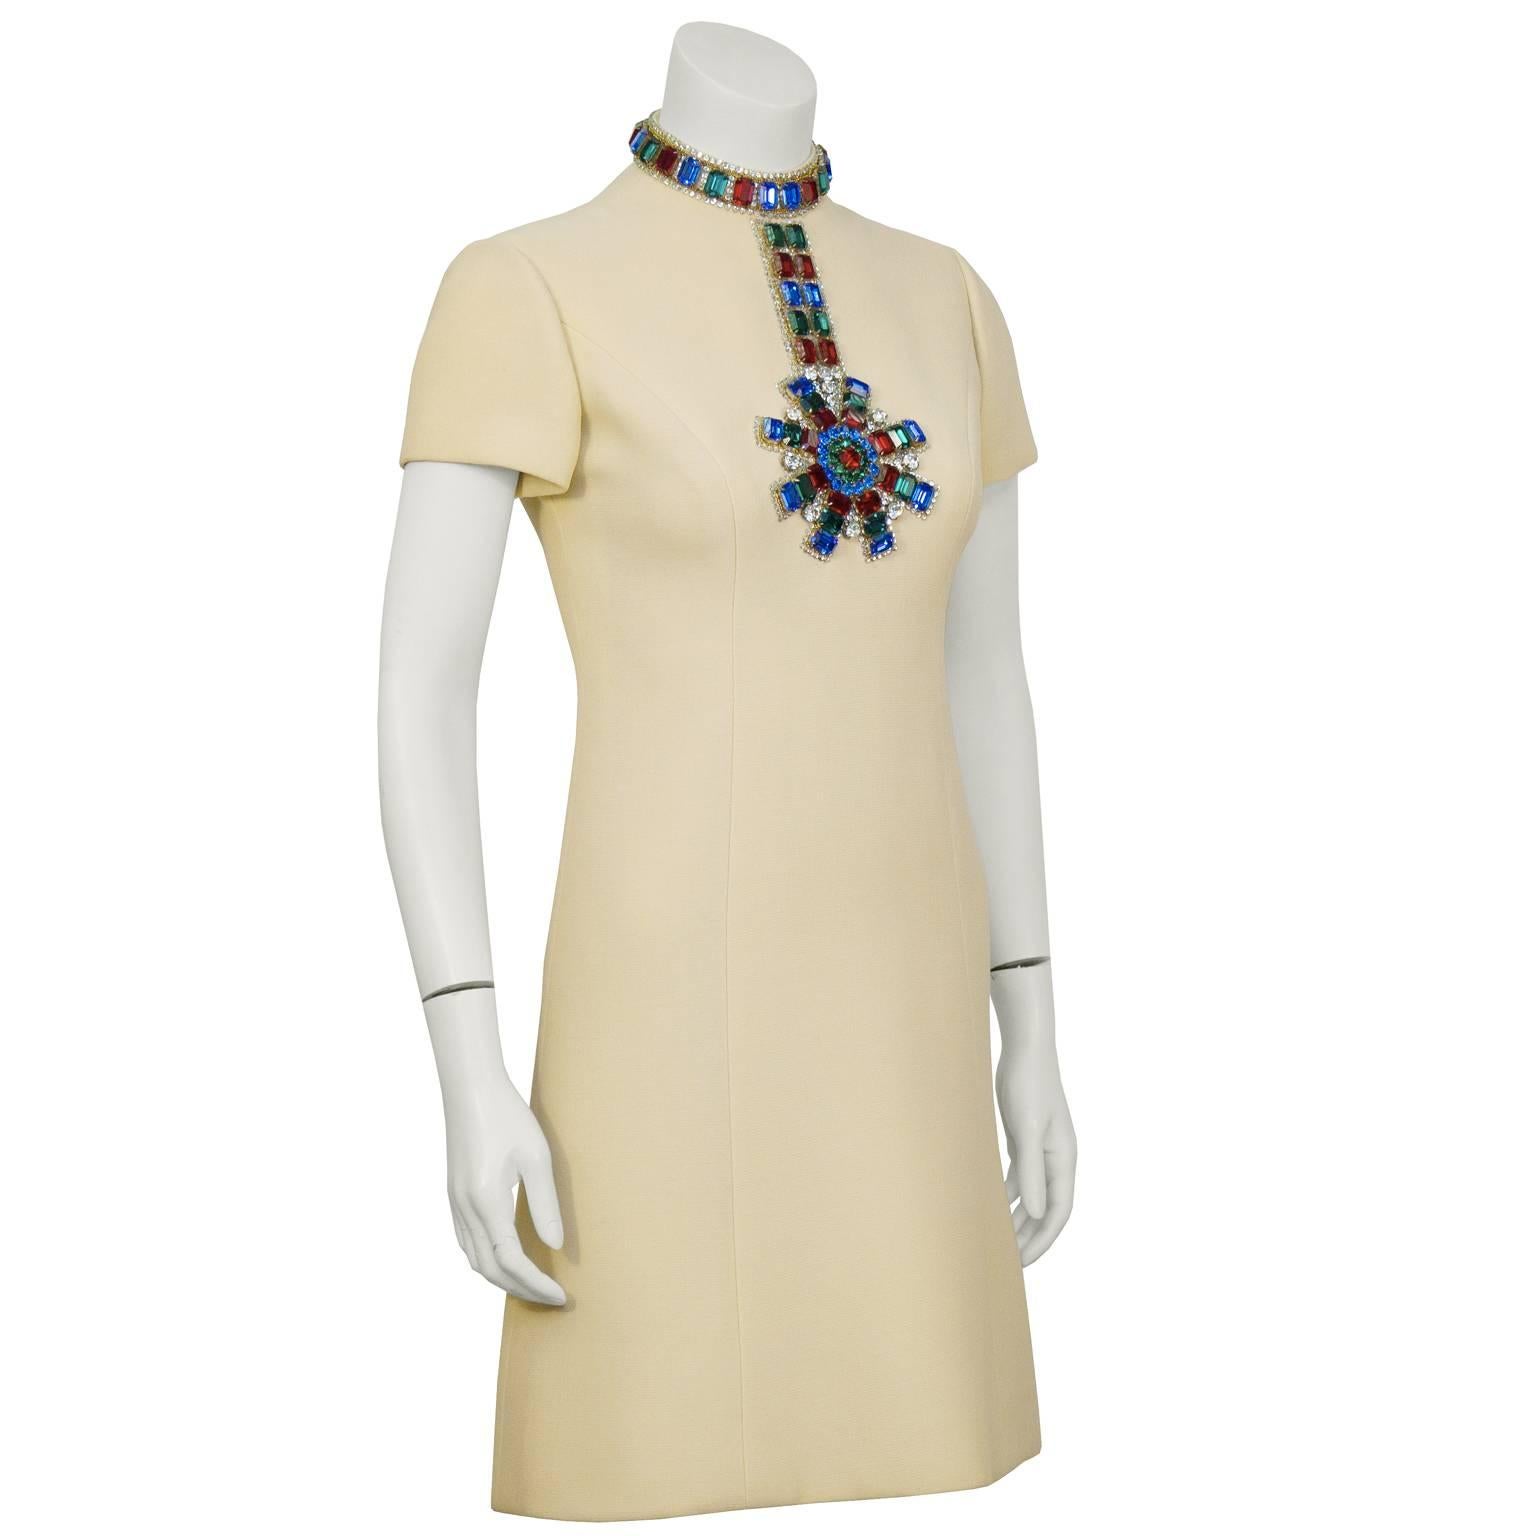 A stand out piece from the 1960’s, this Norell off white cocktail dress with large jewel embellishment needs no accessories.  The classic A line shaped dress, made from mid weight wool. The high neckline and front bodice is adorned with large green,